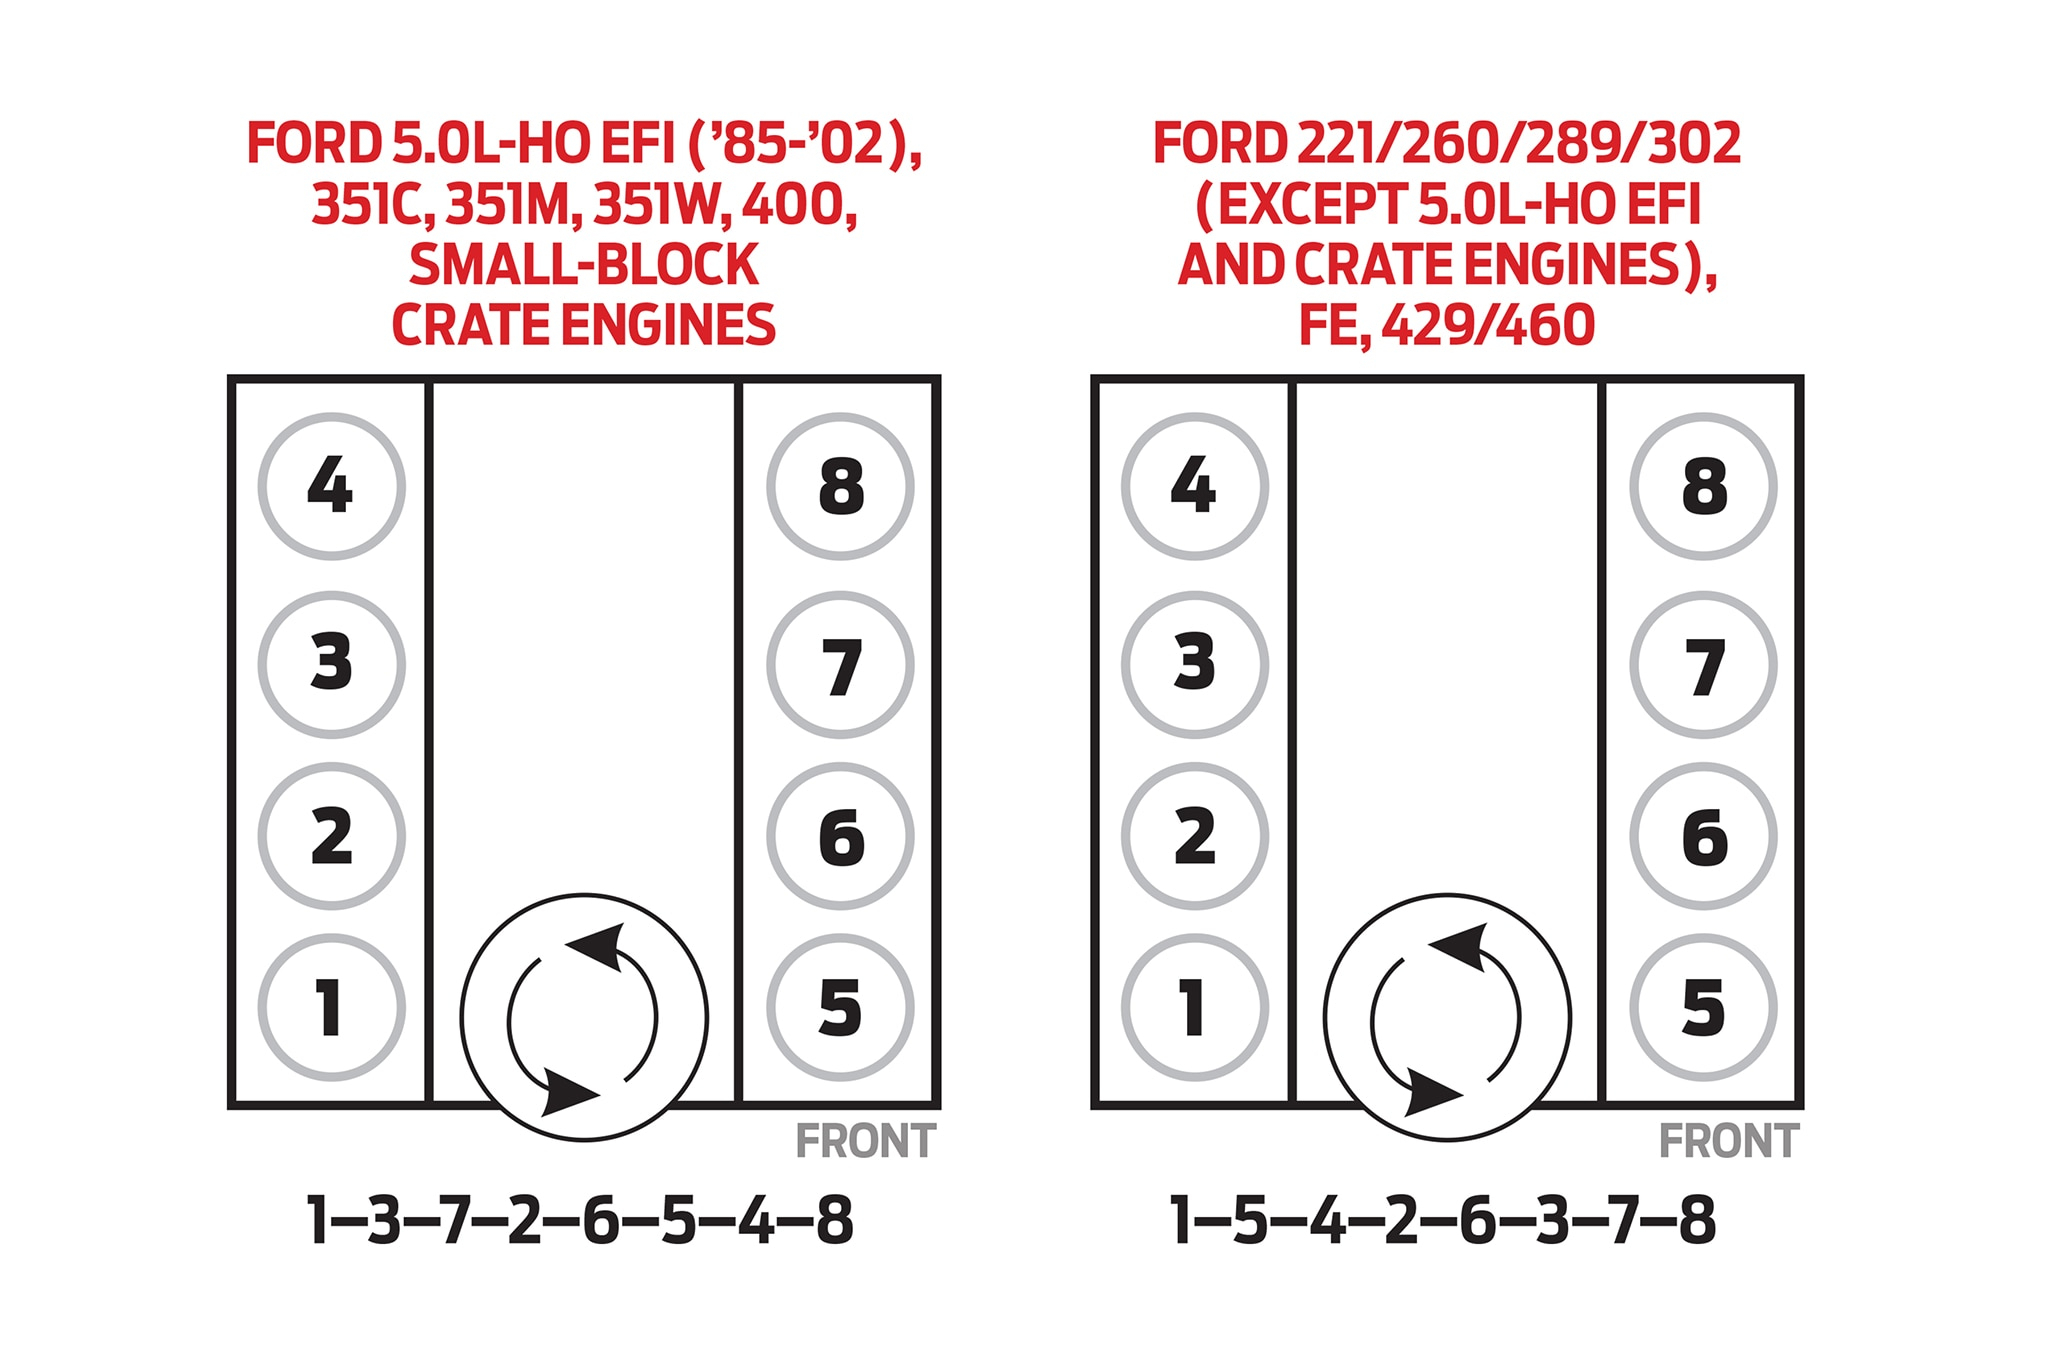 Ford Firing Order For 5.4 - The Ford Firing Order is accompanied by an inst...